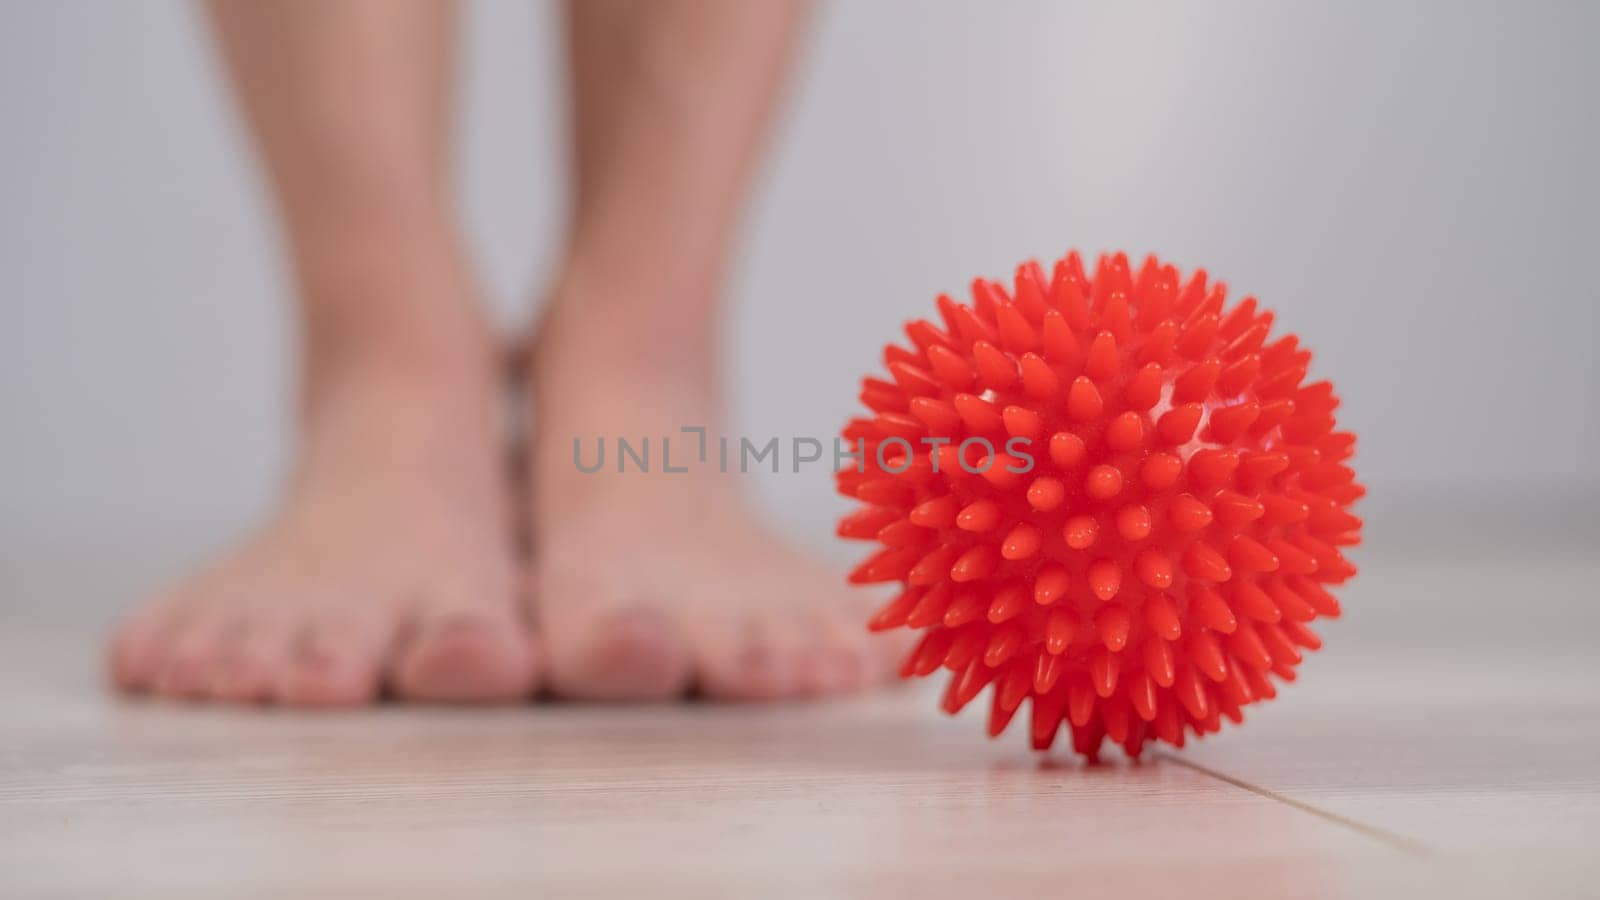 Close-up of a woman's foot on a massage ball with spikes. by mrwed54